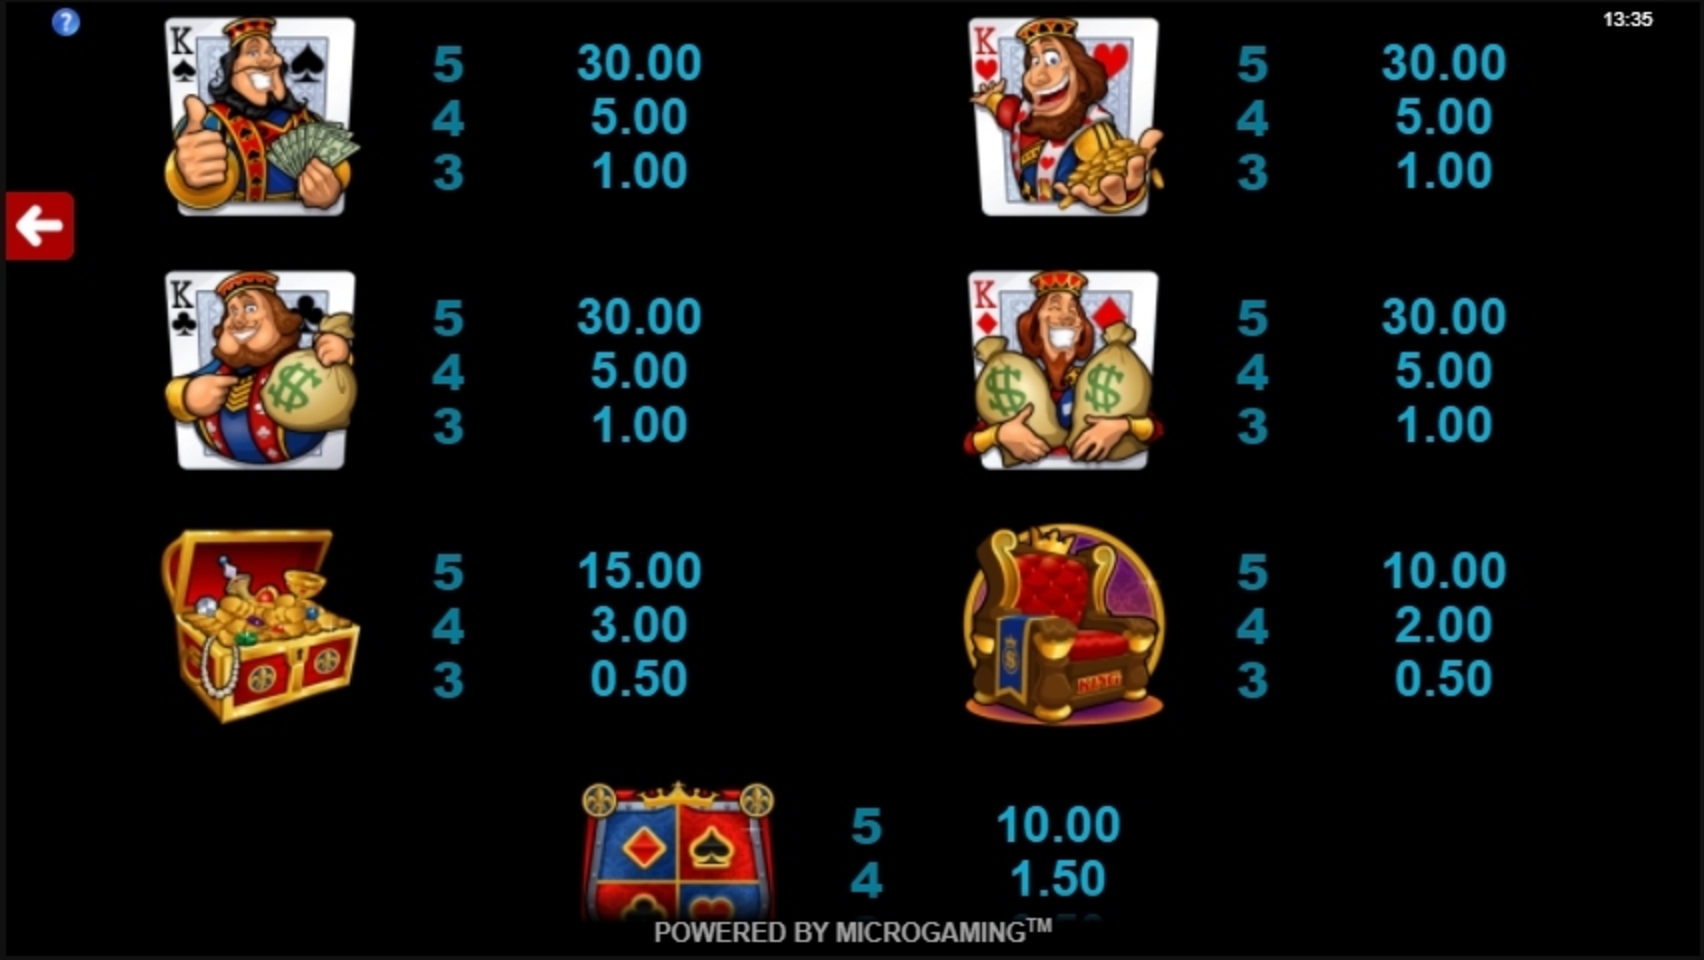 Info of Kings of Cash Slot Game by Microgaming